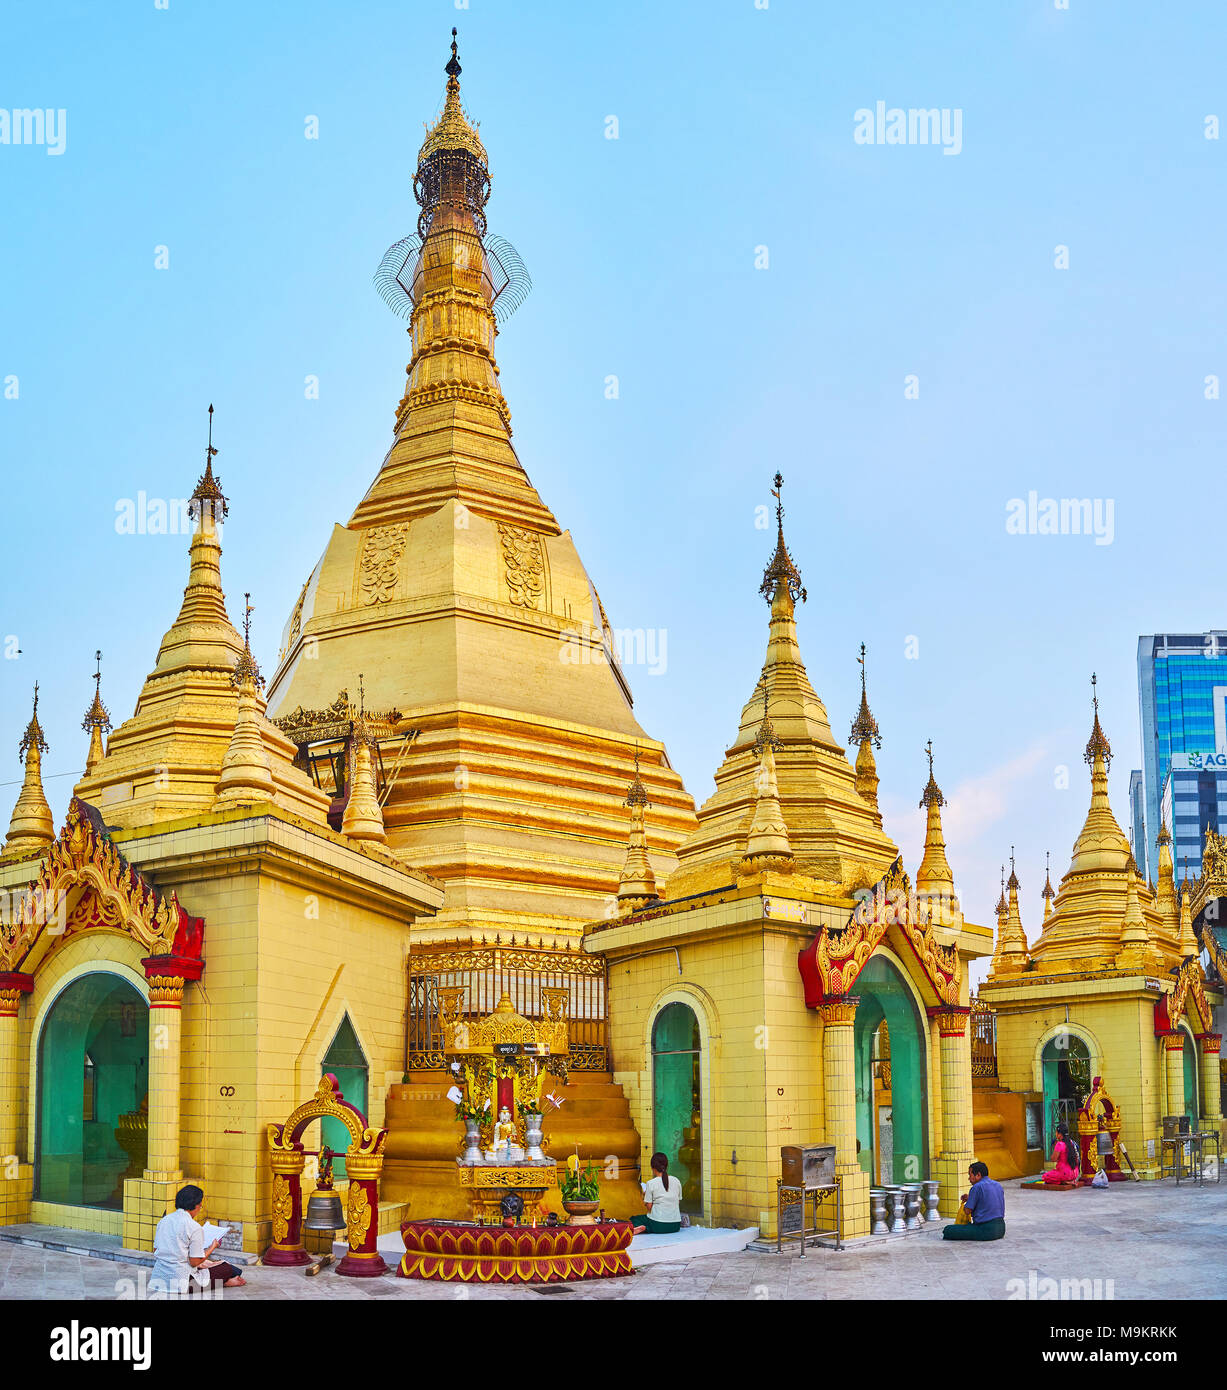 YANGON, MYANMAR - FEBRUARY 14, 2018: The golden Stupa of Sule Pagoda is topped with traditional hti decorative element - umbrella with relief patterns Stock Photo